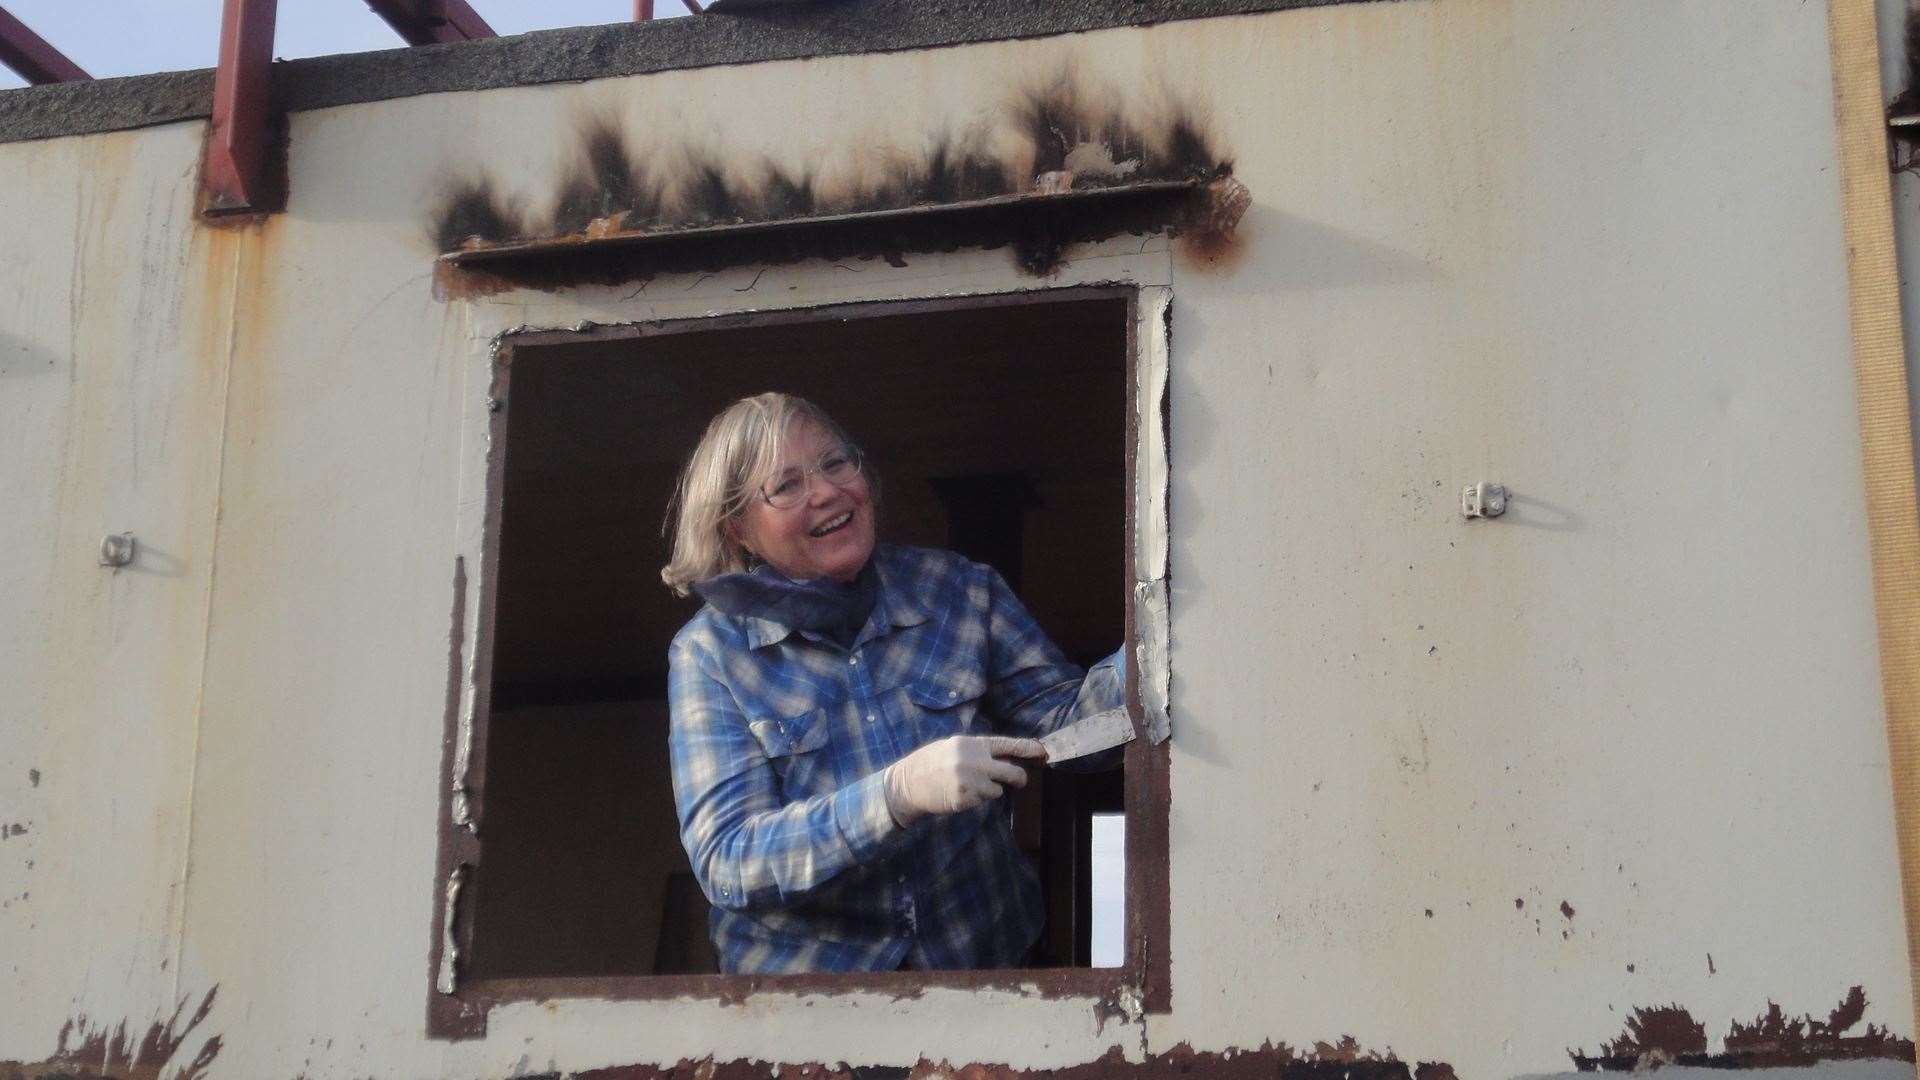 Frances Beaumont scraping the windows of the joliver tugboat which is now docked in Rochester